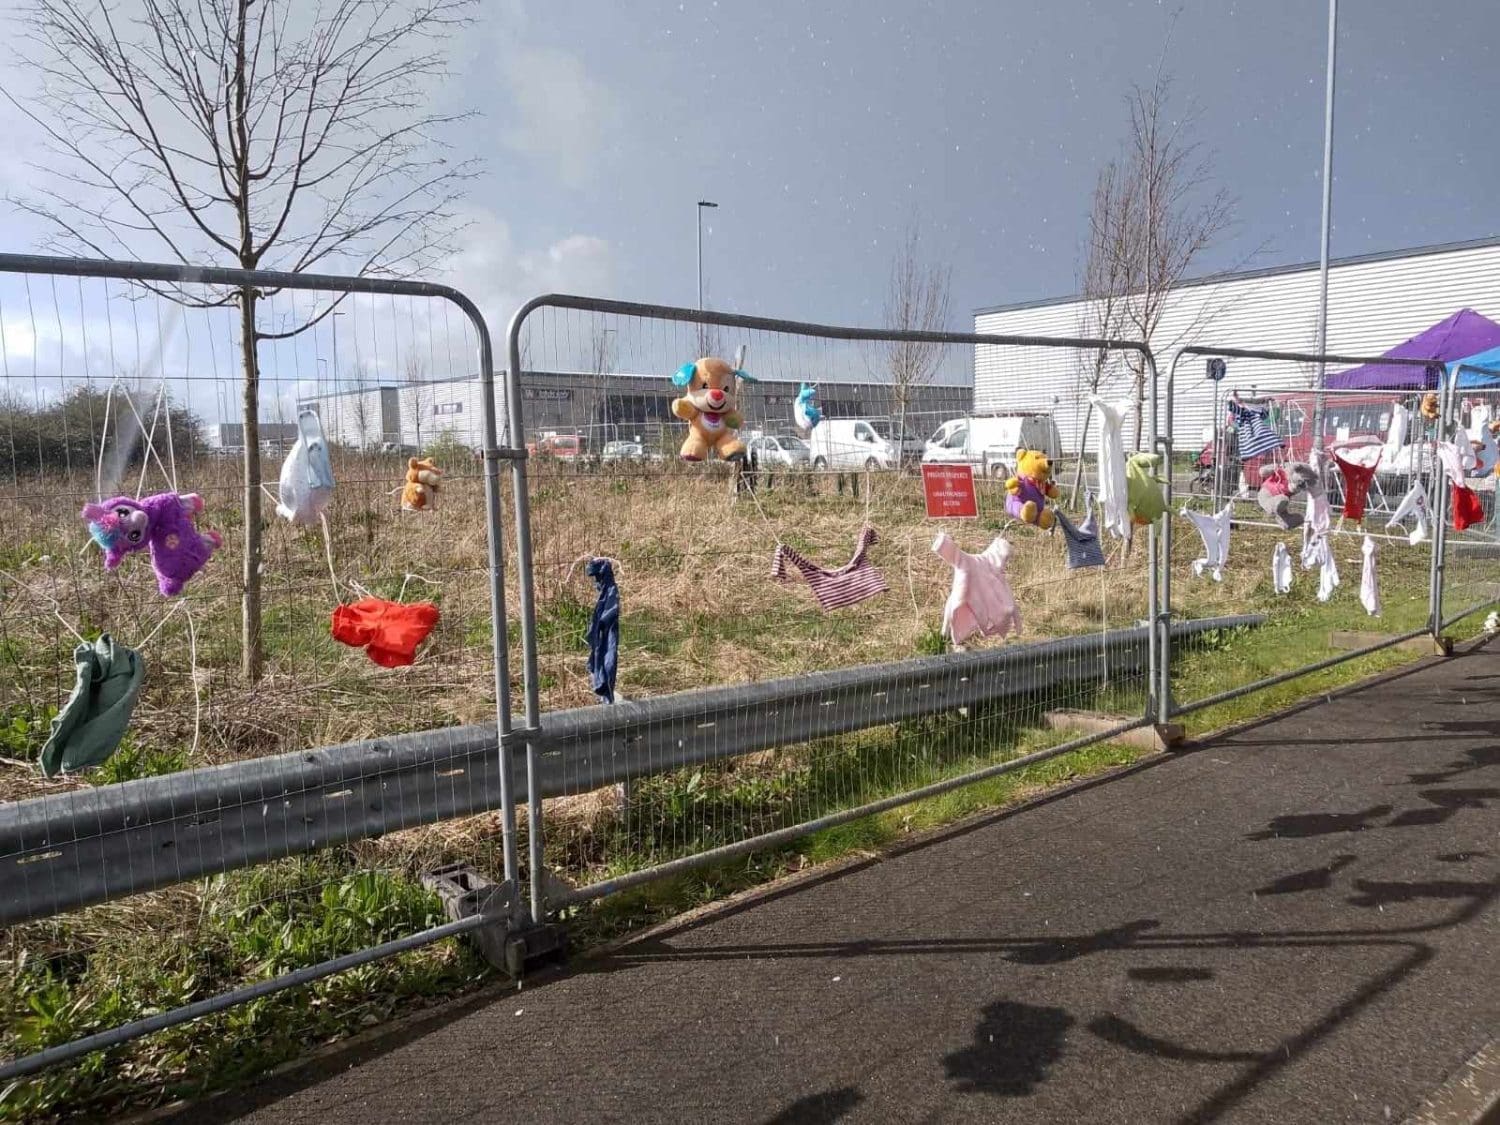 Children's toys and clothes hung on Elbit's fence in Bristol